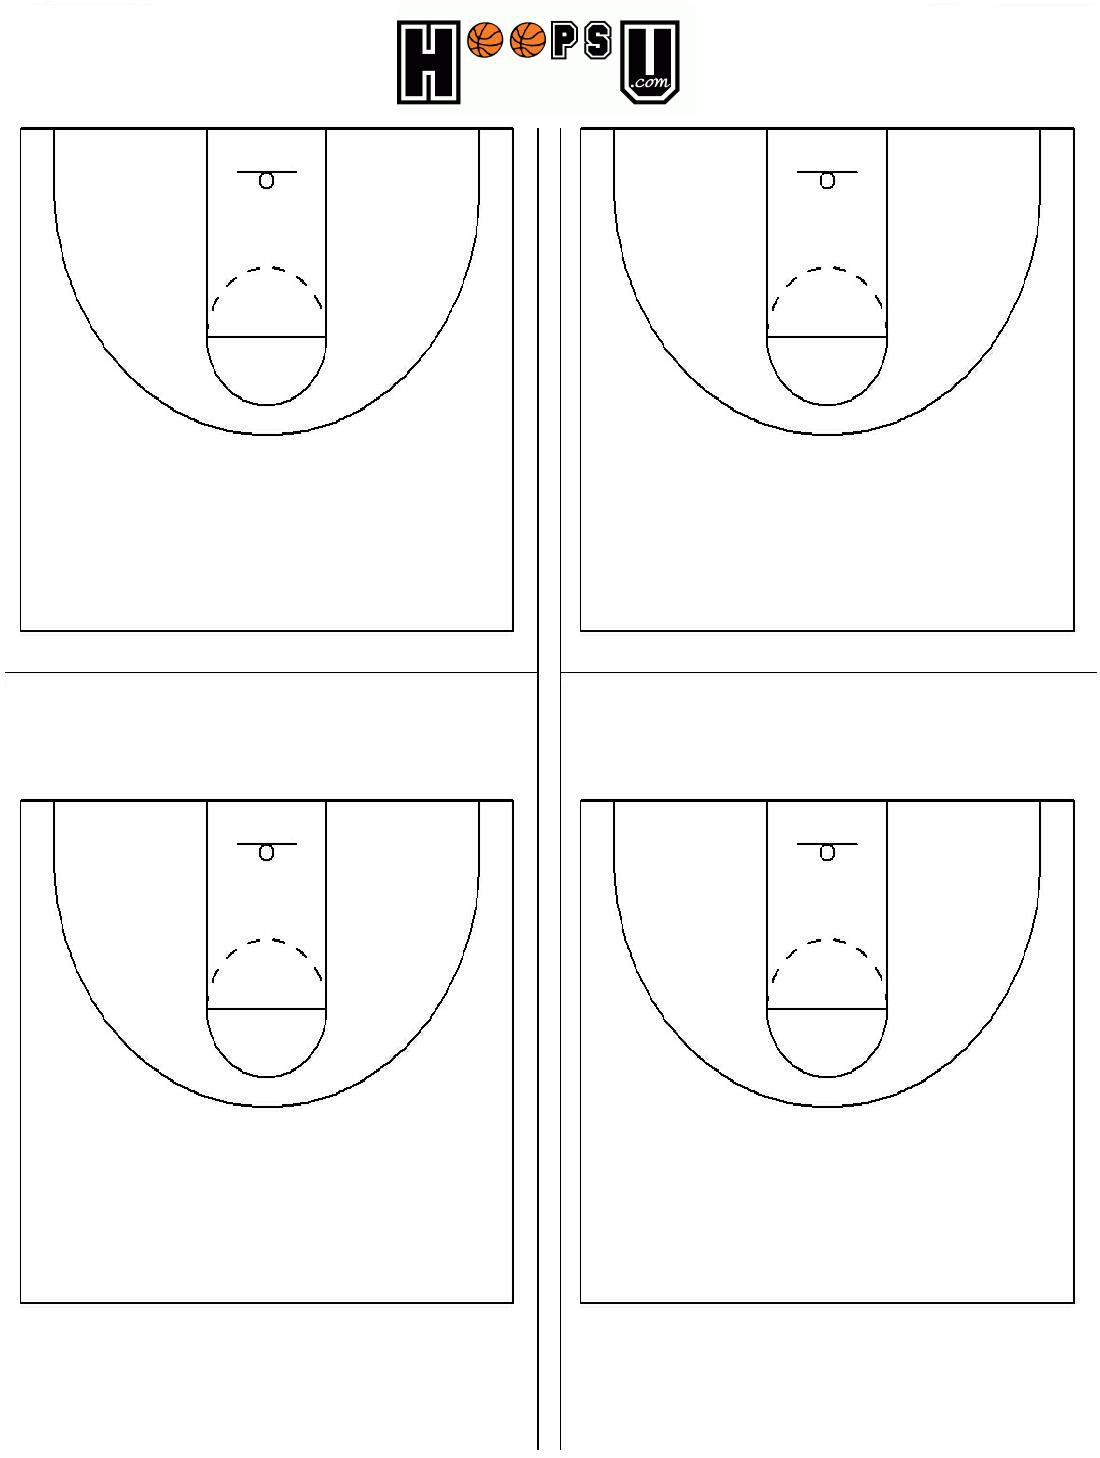 what-are-the-basketball-court-dimensions-diagrams-for-court-striping-free-printable